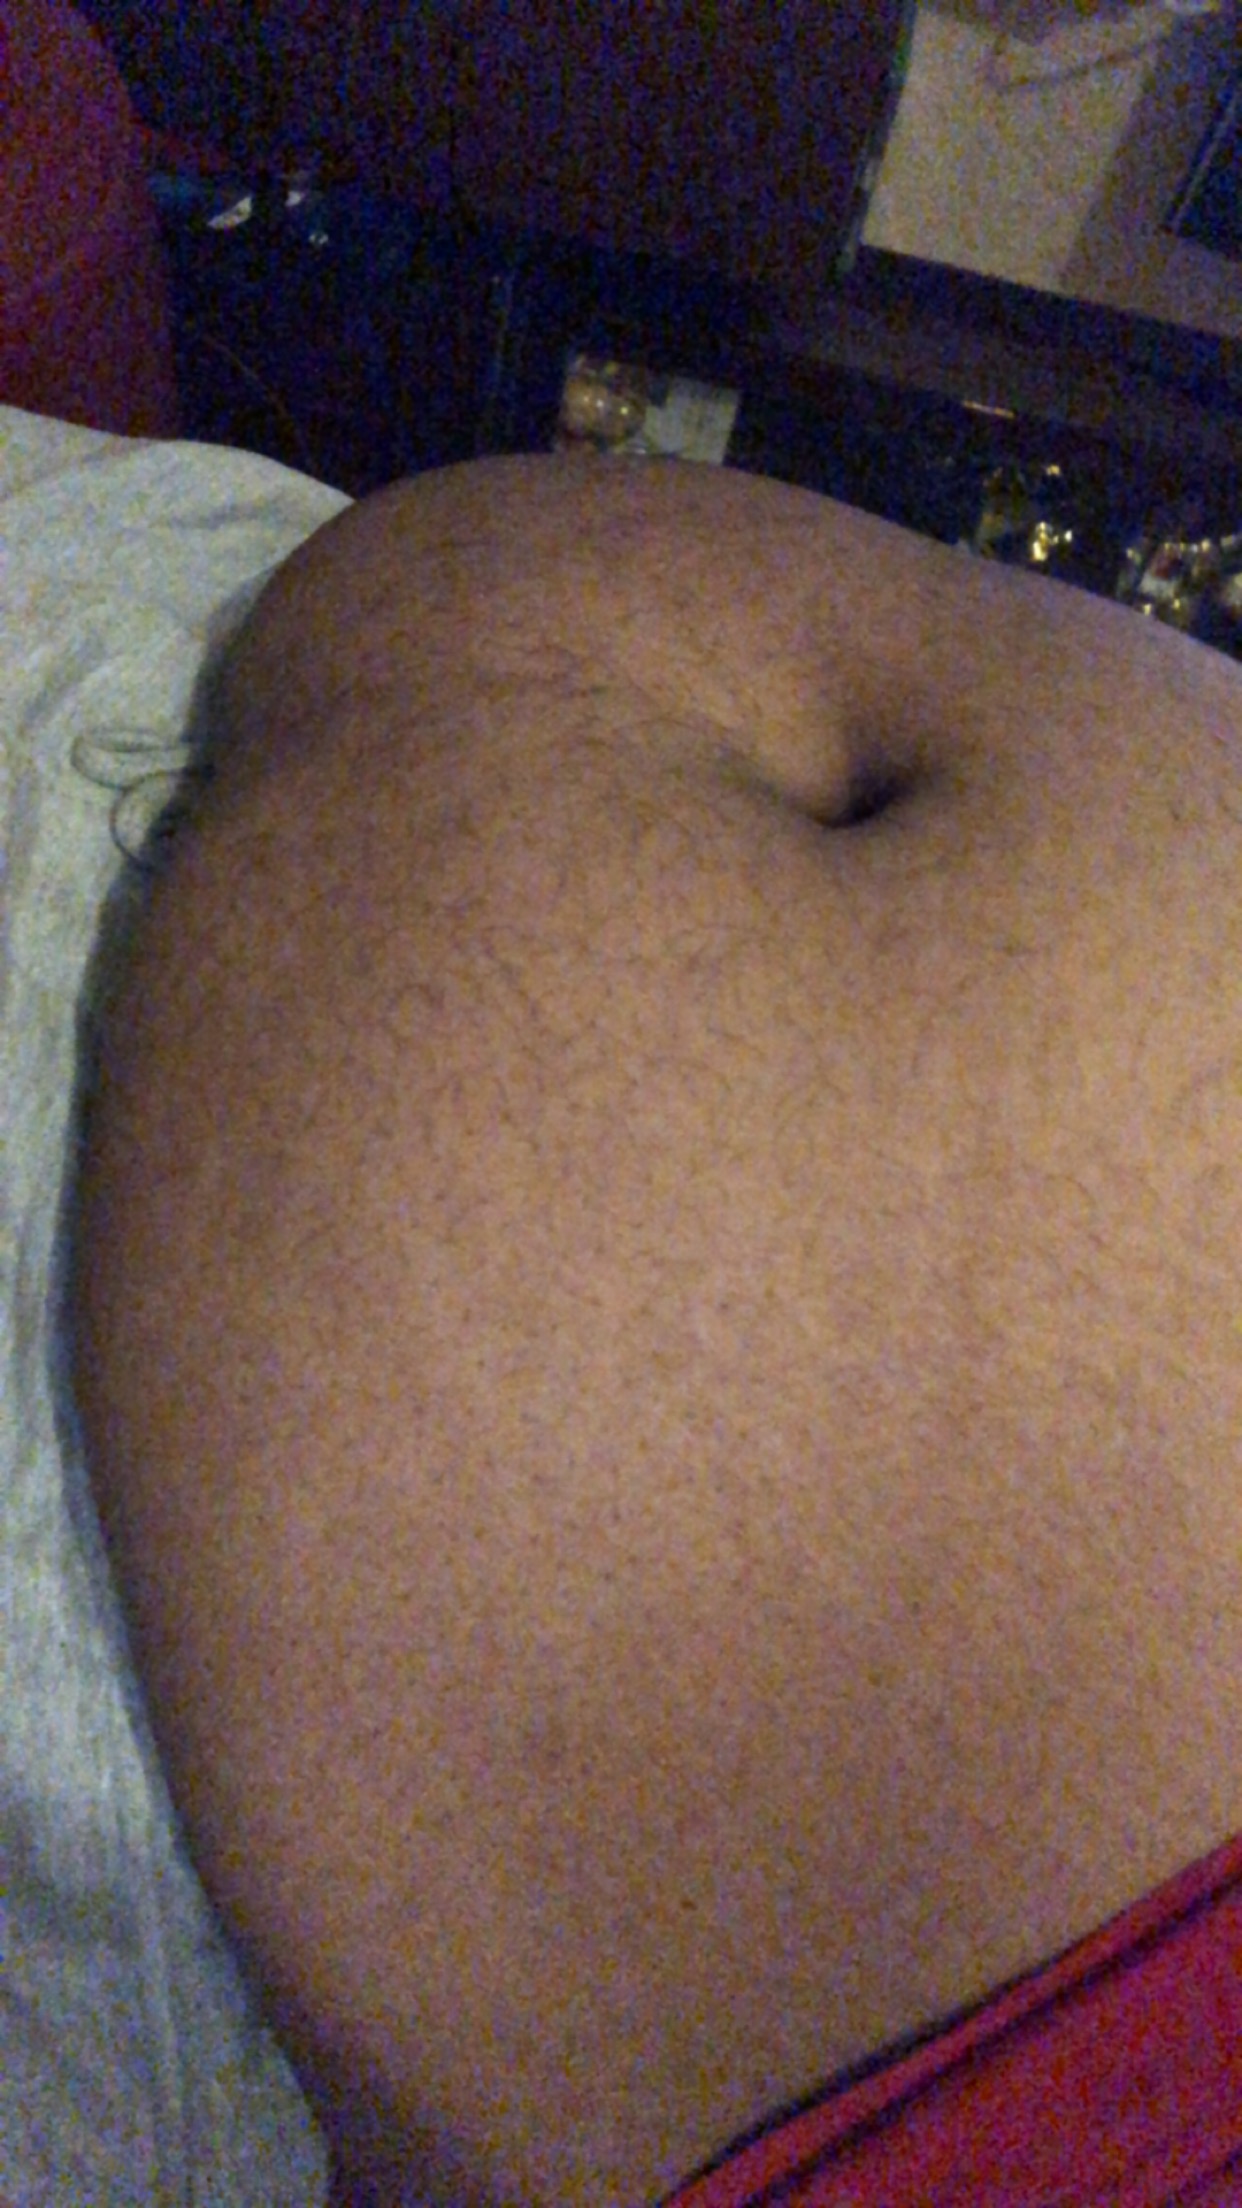 My Fat Belly and deep navel play